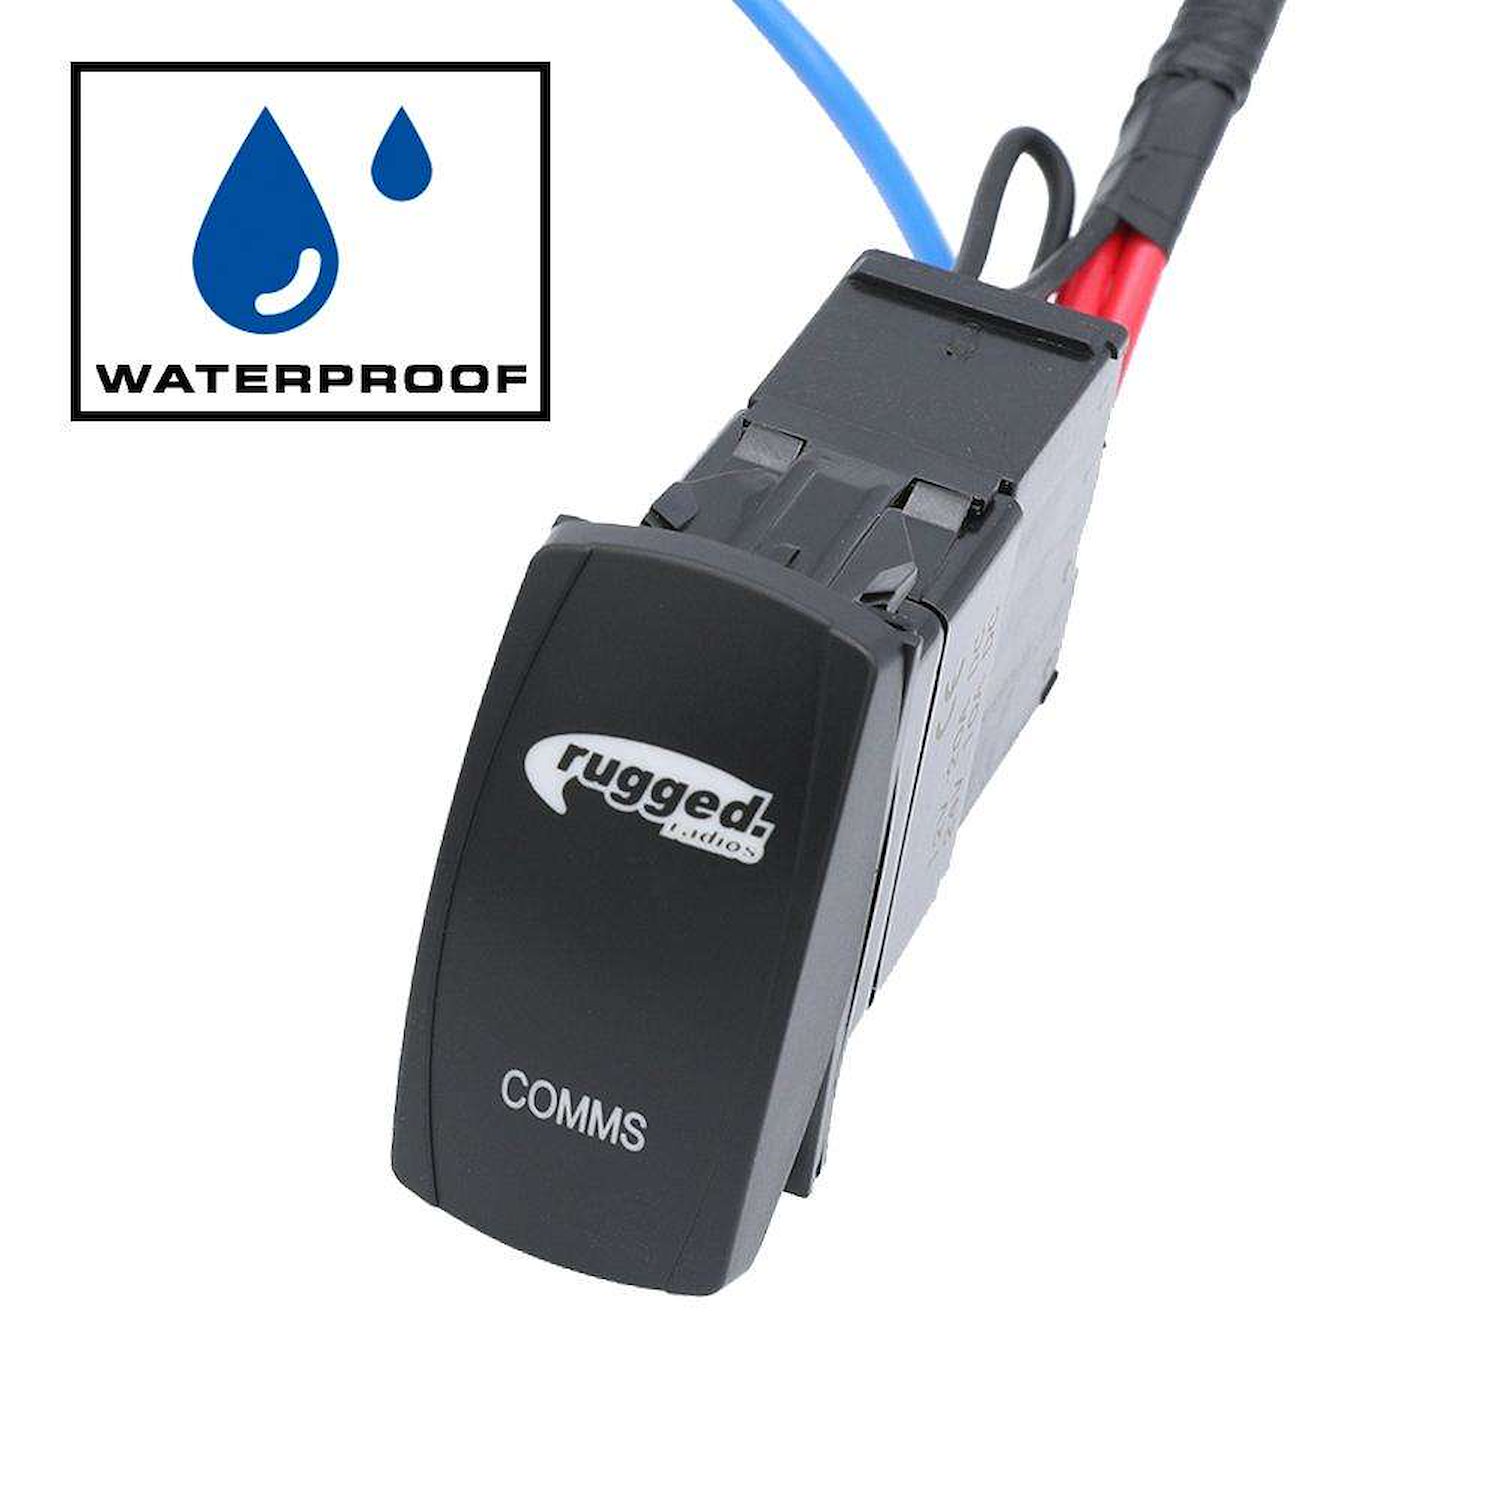 PH-MS-WP Rocker Power Switch, For Waterproof Mobile Radios & Rugged Intercoms